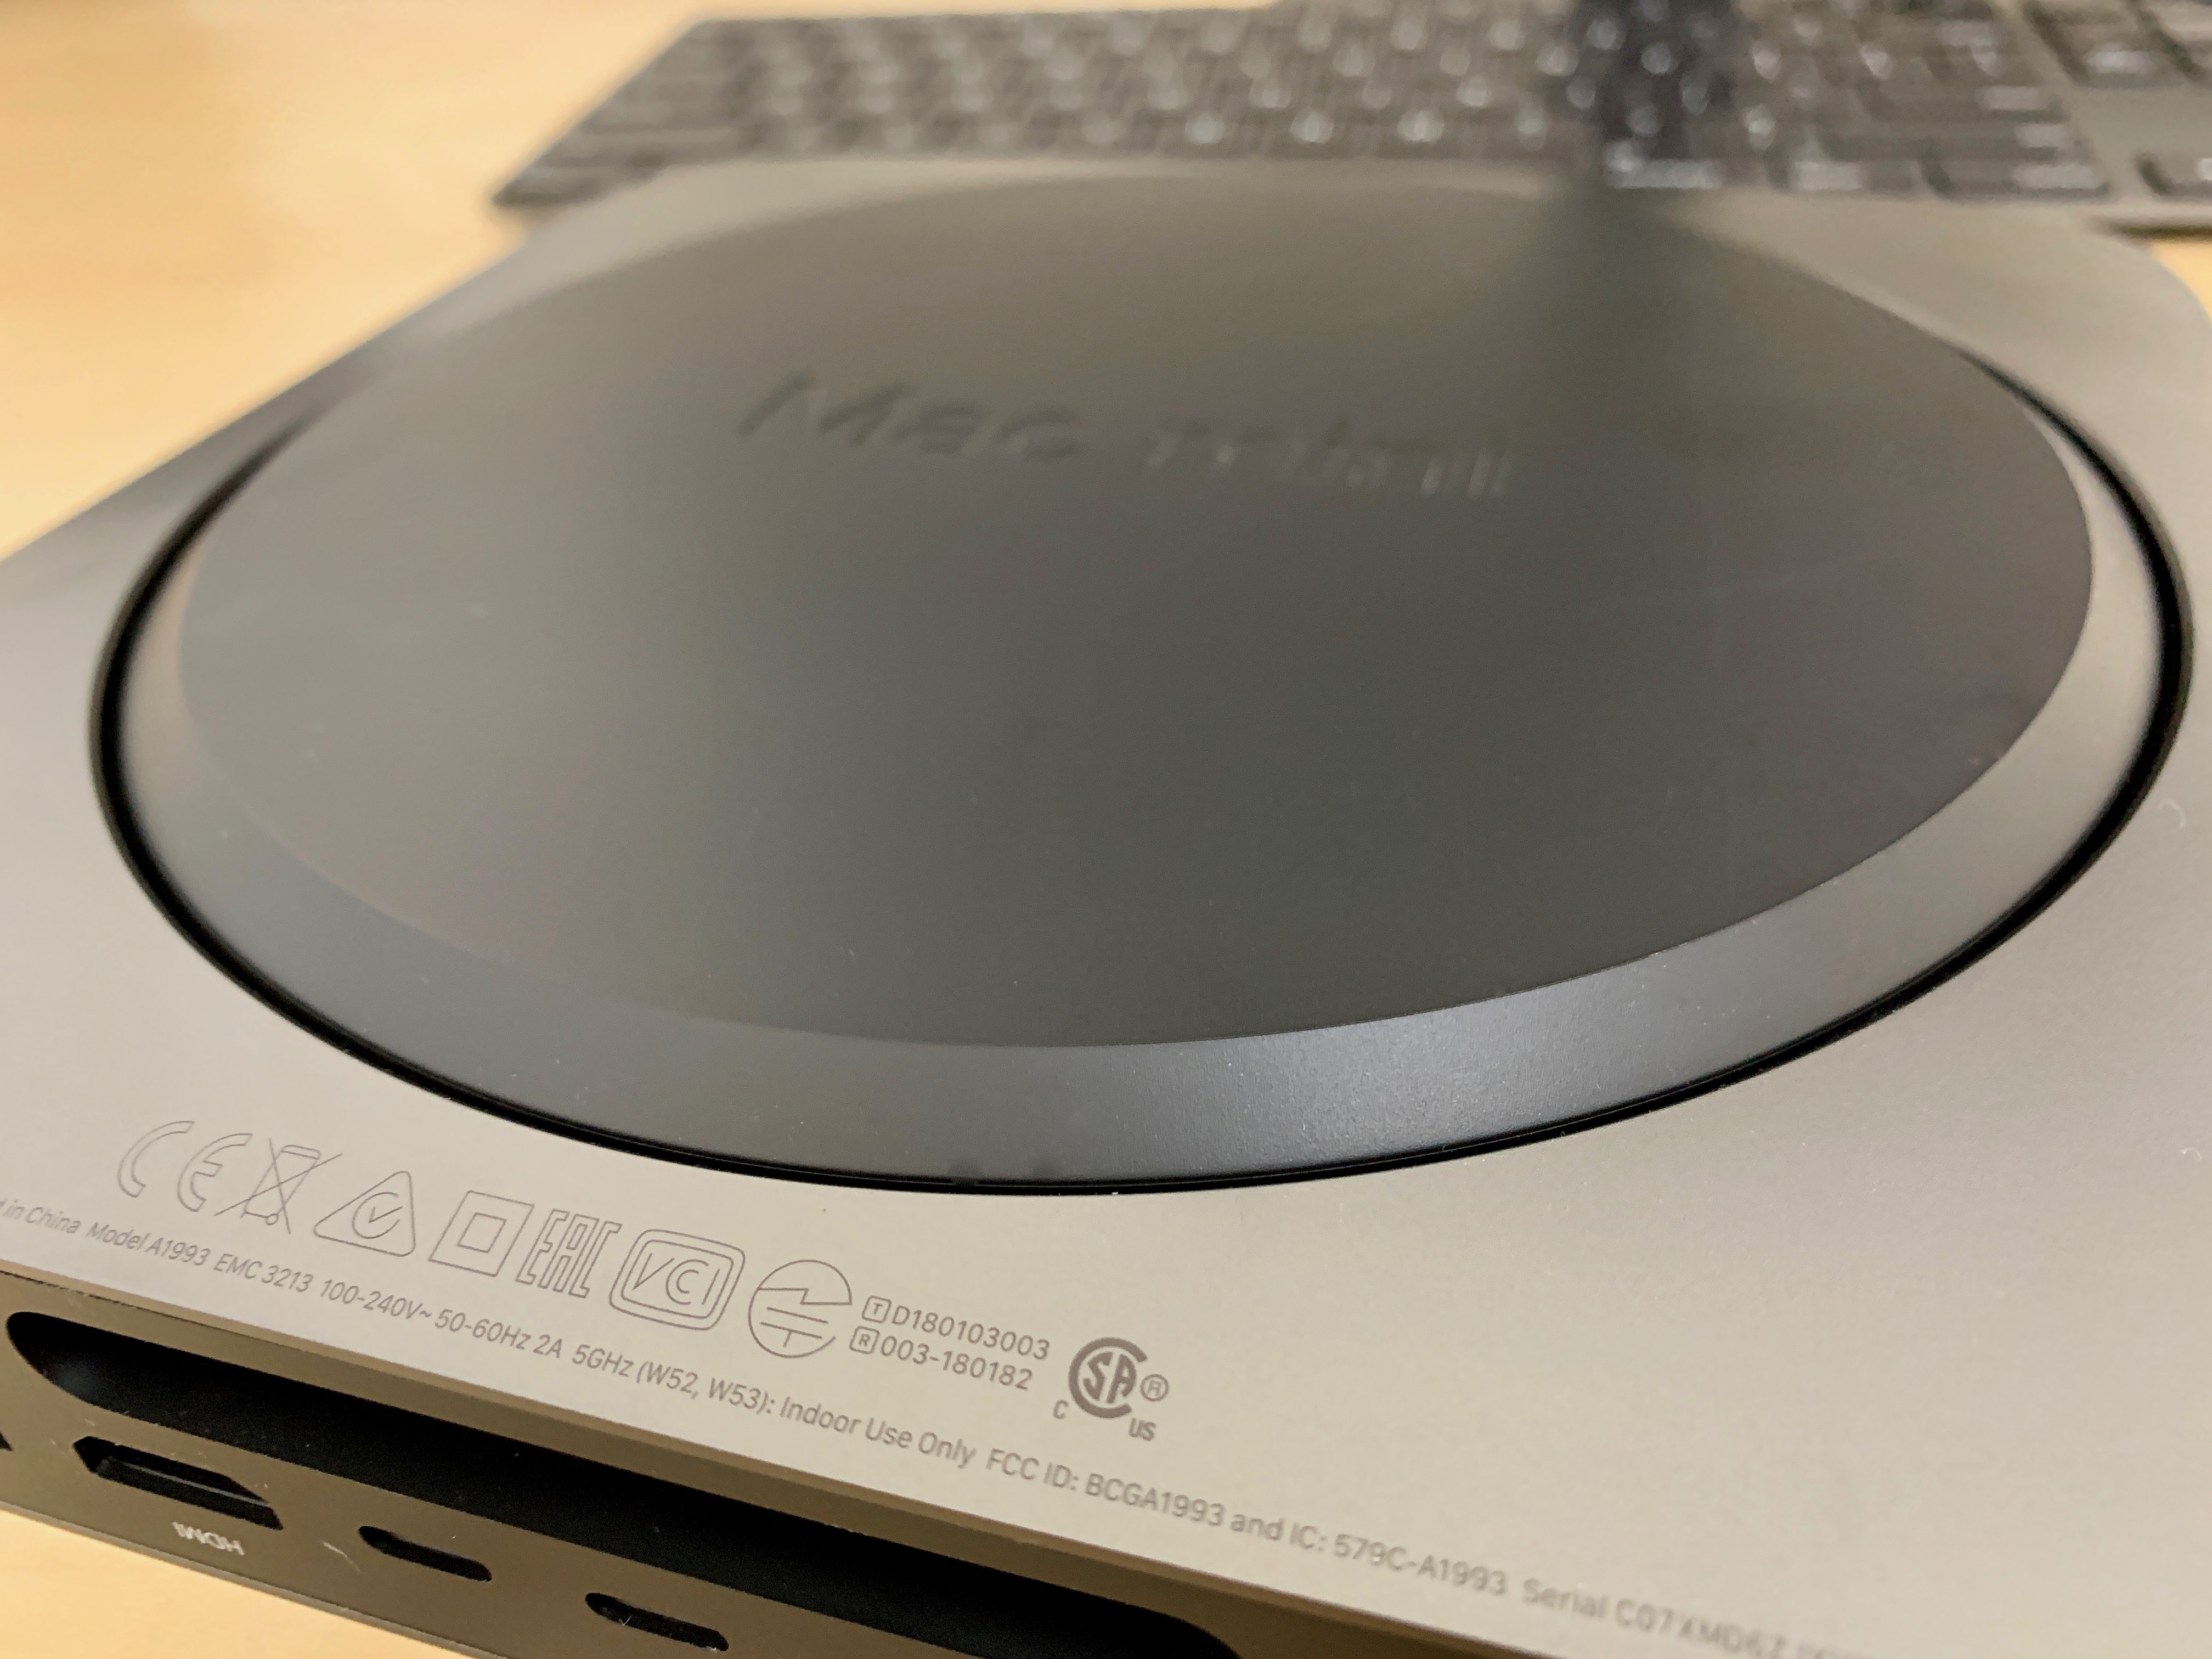 Apple Mac Mini (2018) review: The little Mac that could | ZDNet